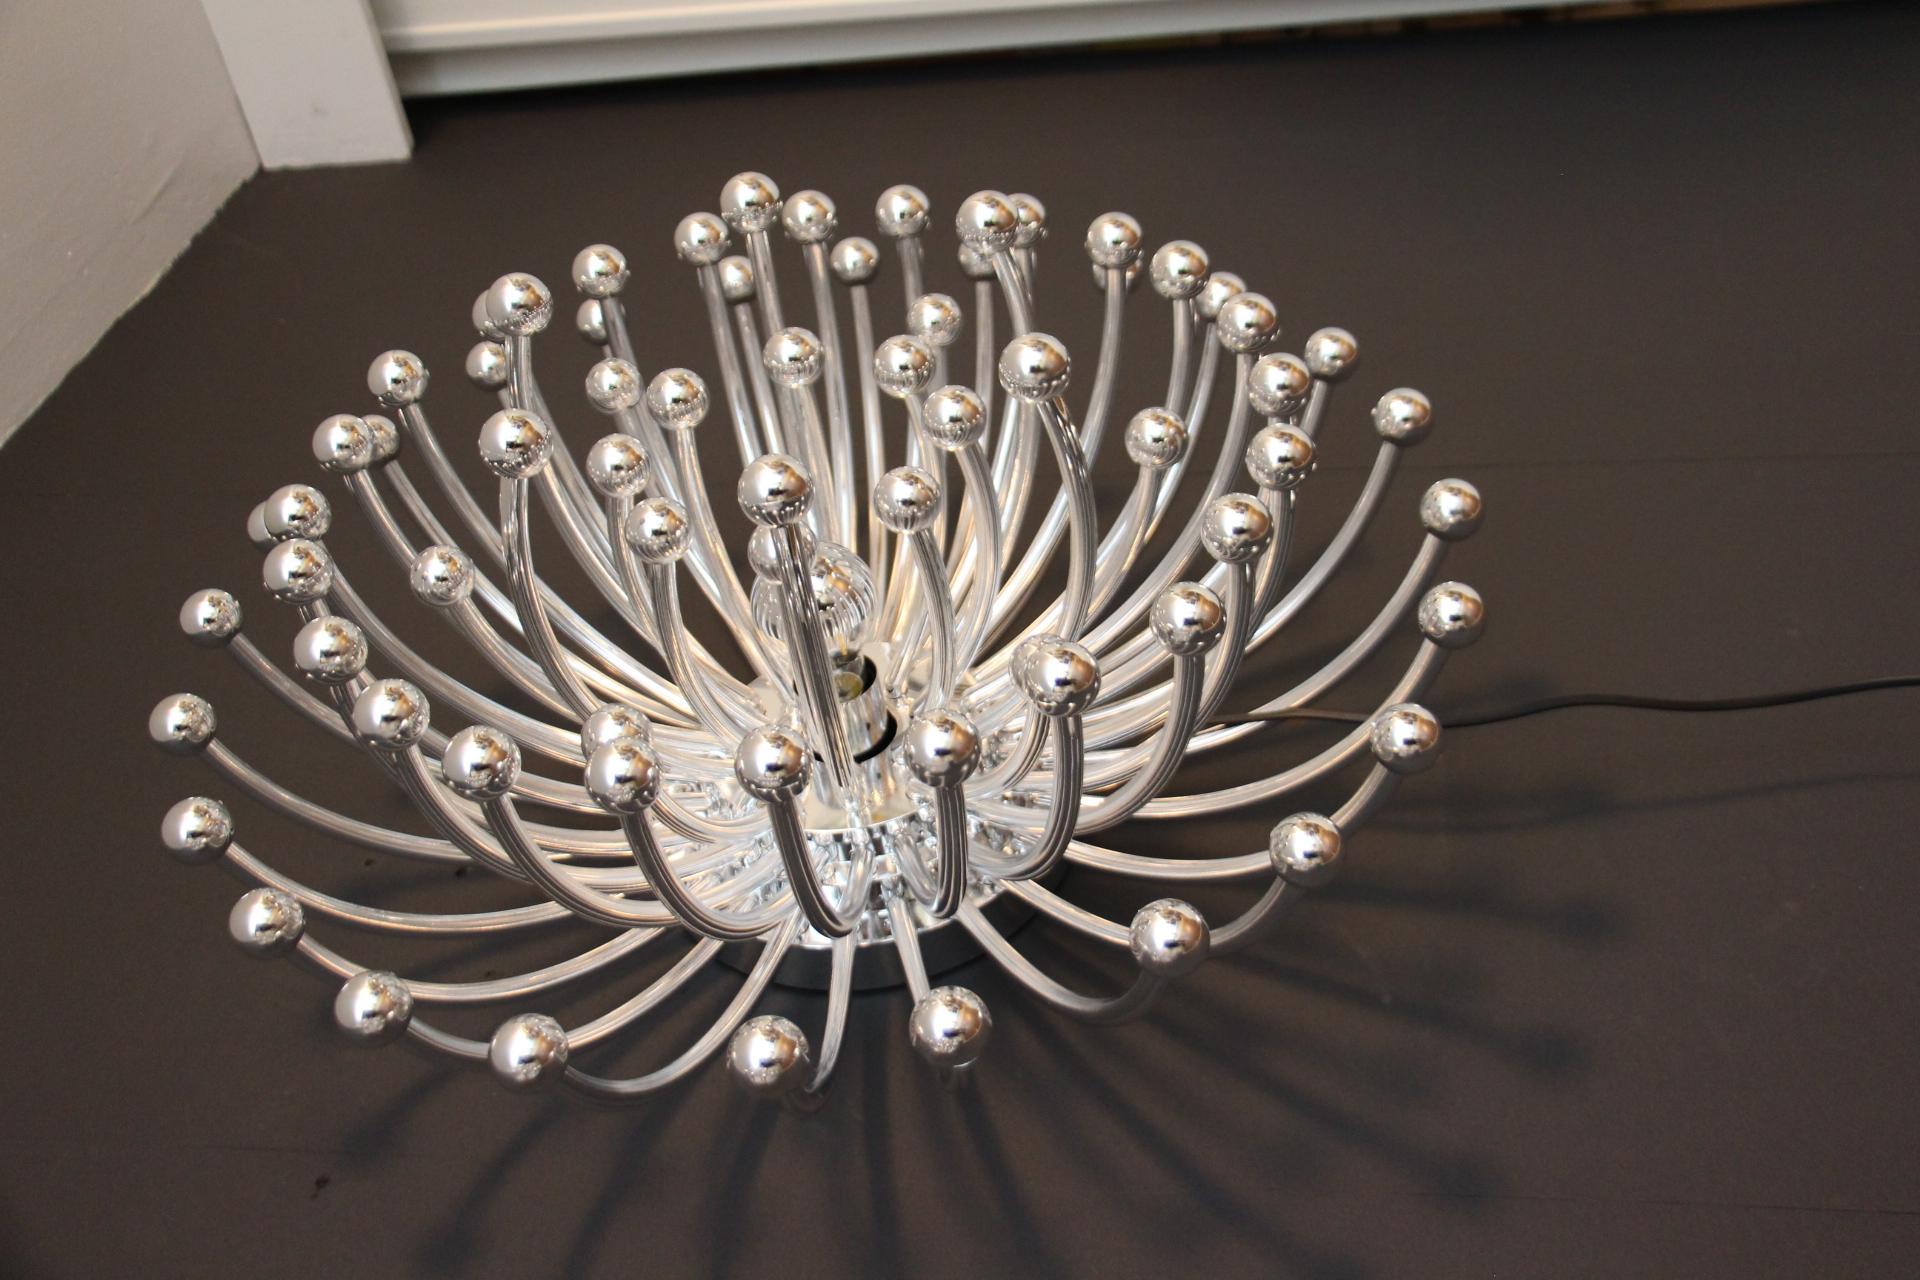 60 cm Silver Pistillo Chandeliers Table Lamps or Wall Lamps By Valenti Milano 6